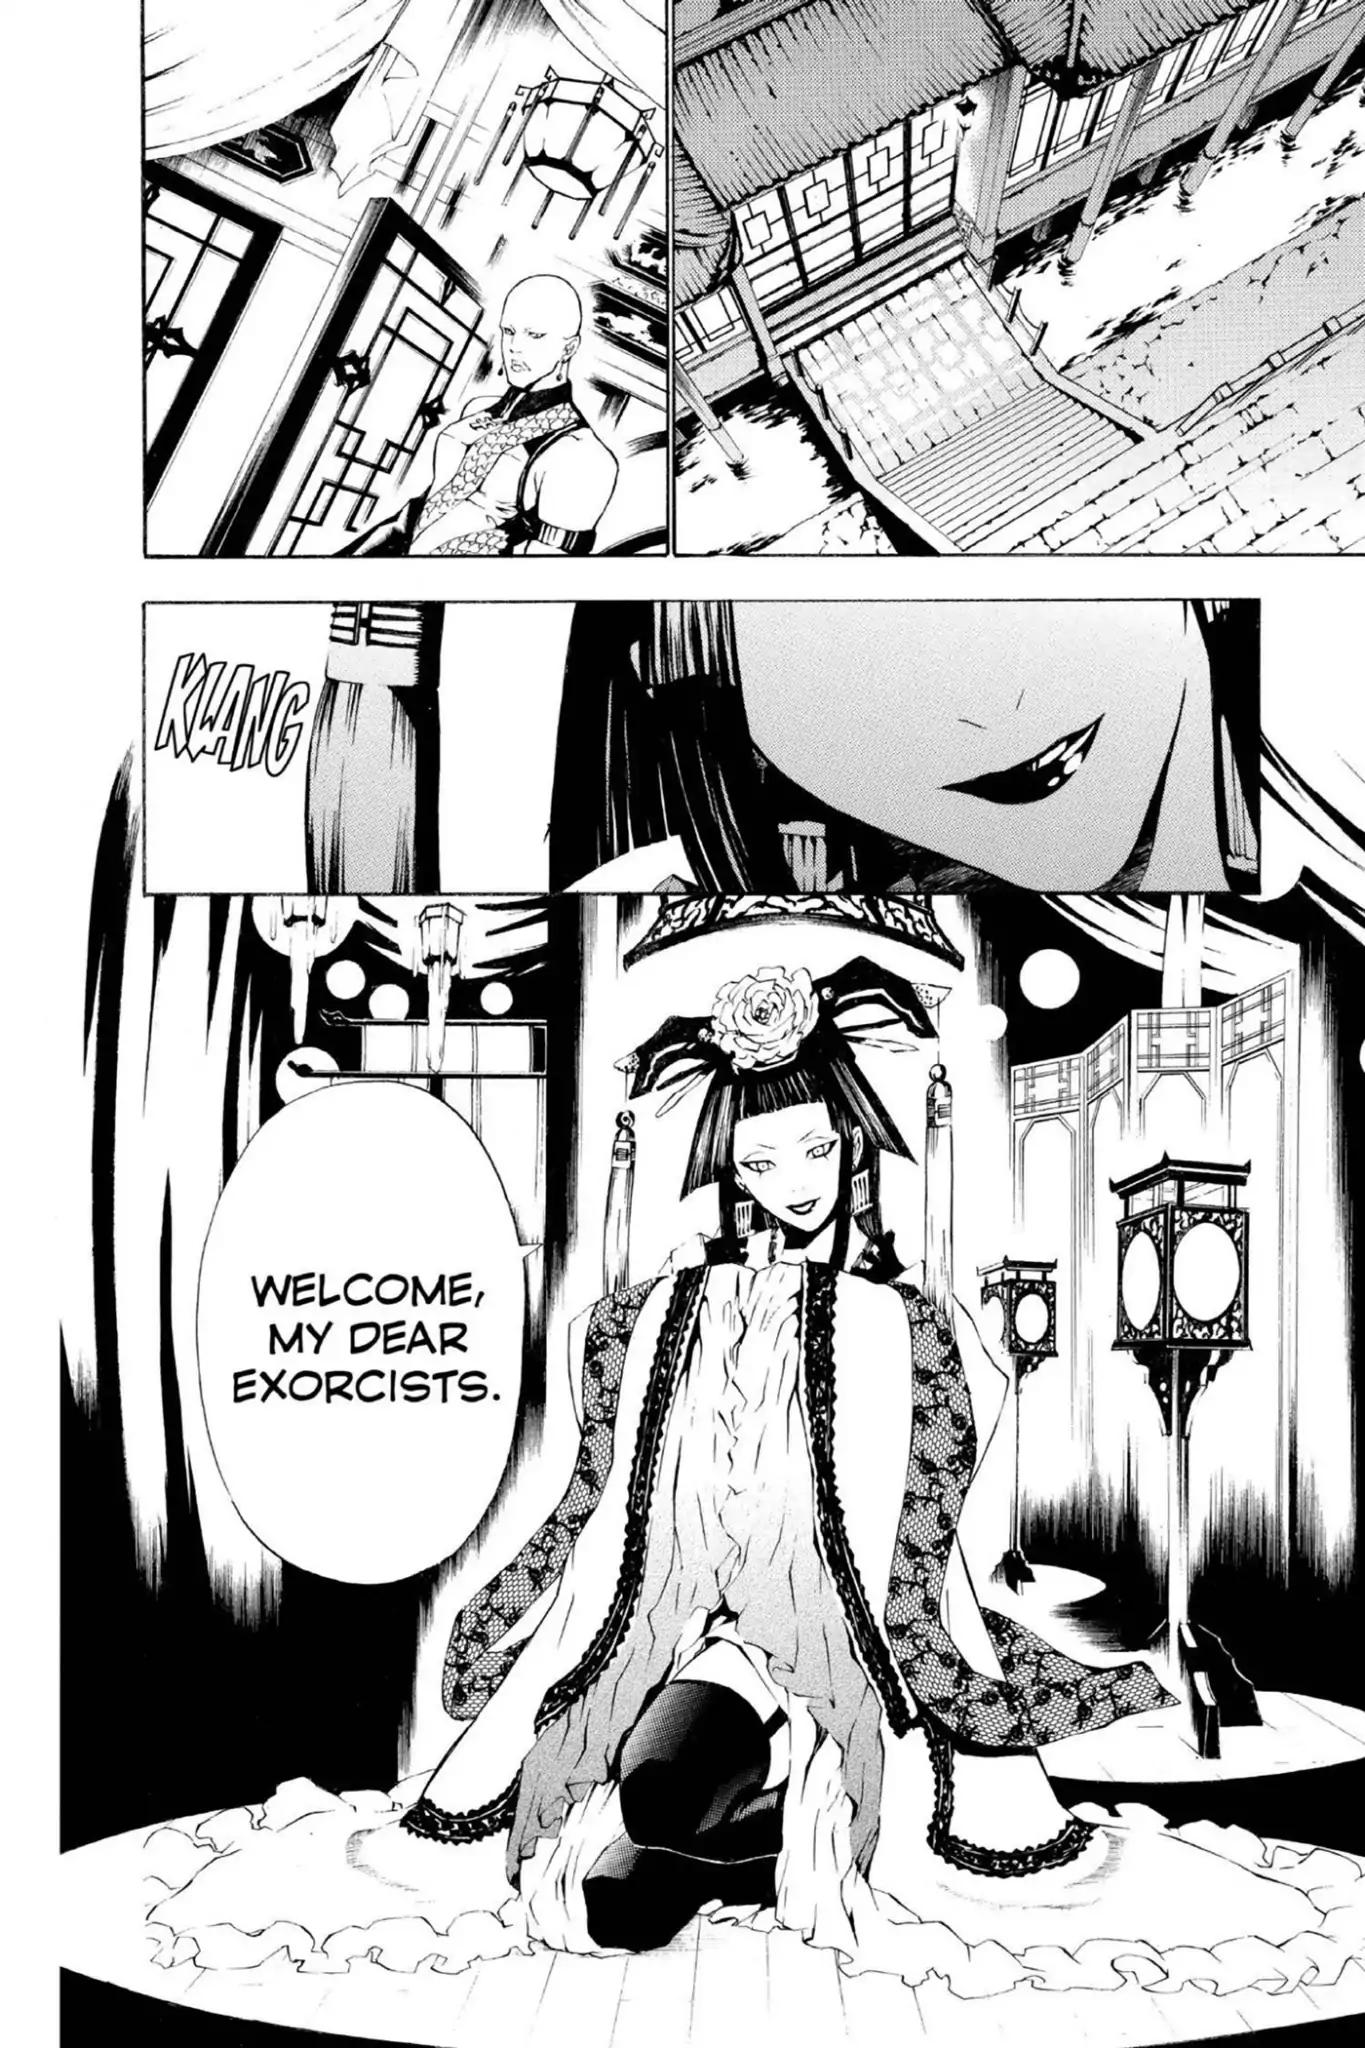 D.Gray-man chapter 0 page 6